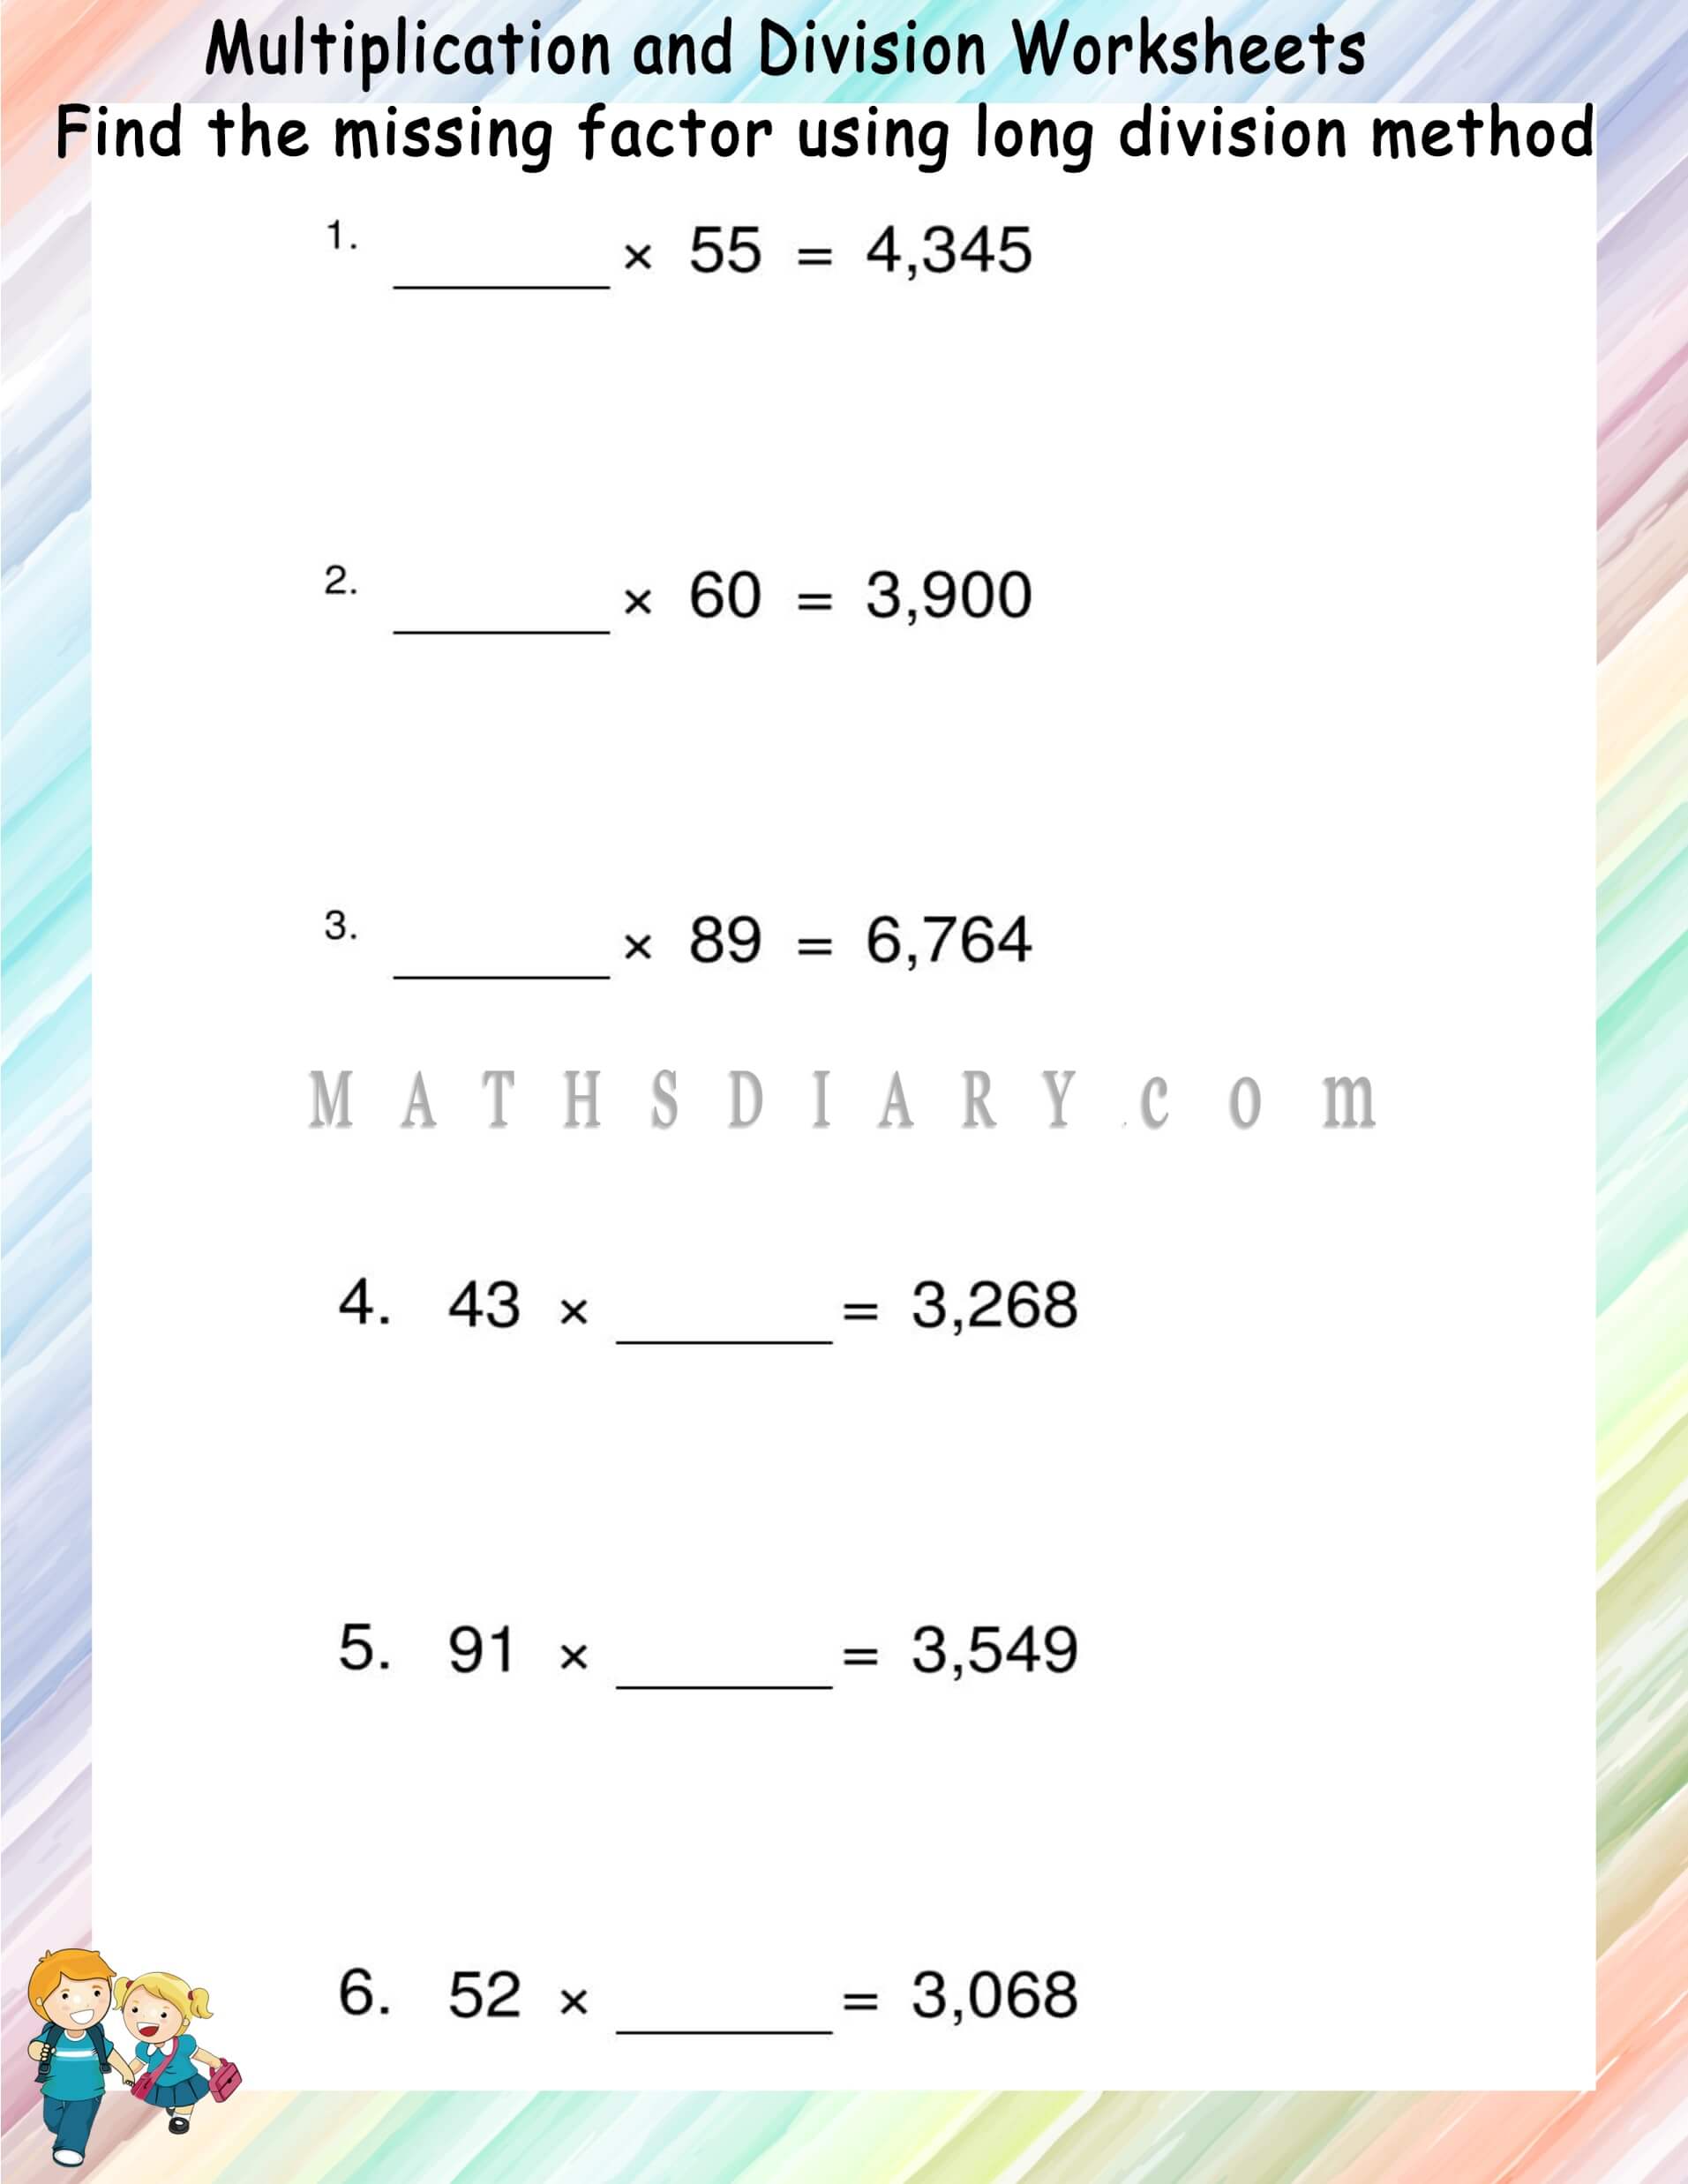 Finding Missing Factor In Multiplication And Division Math Worksheets MathsDiary